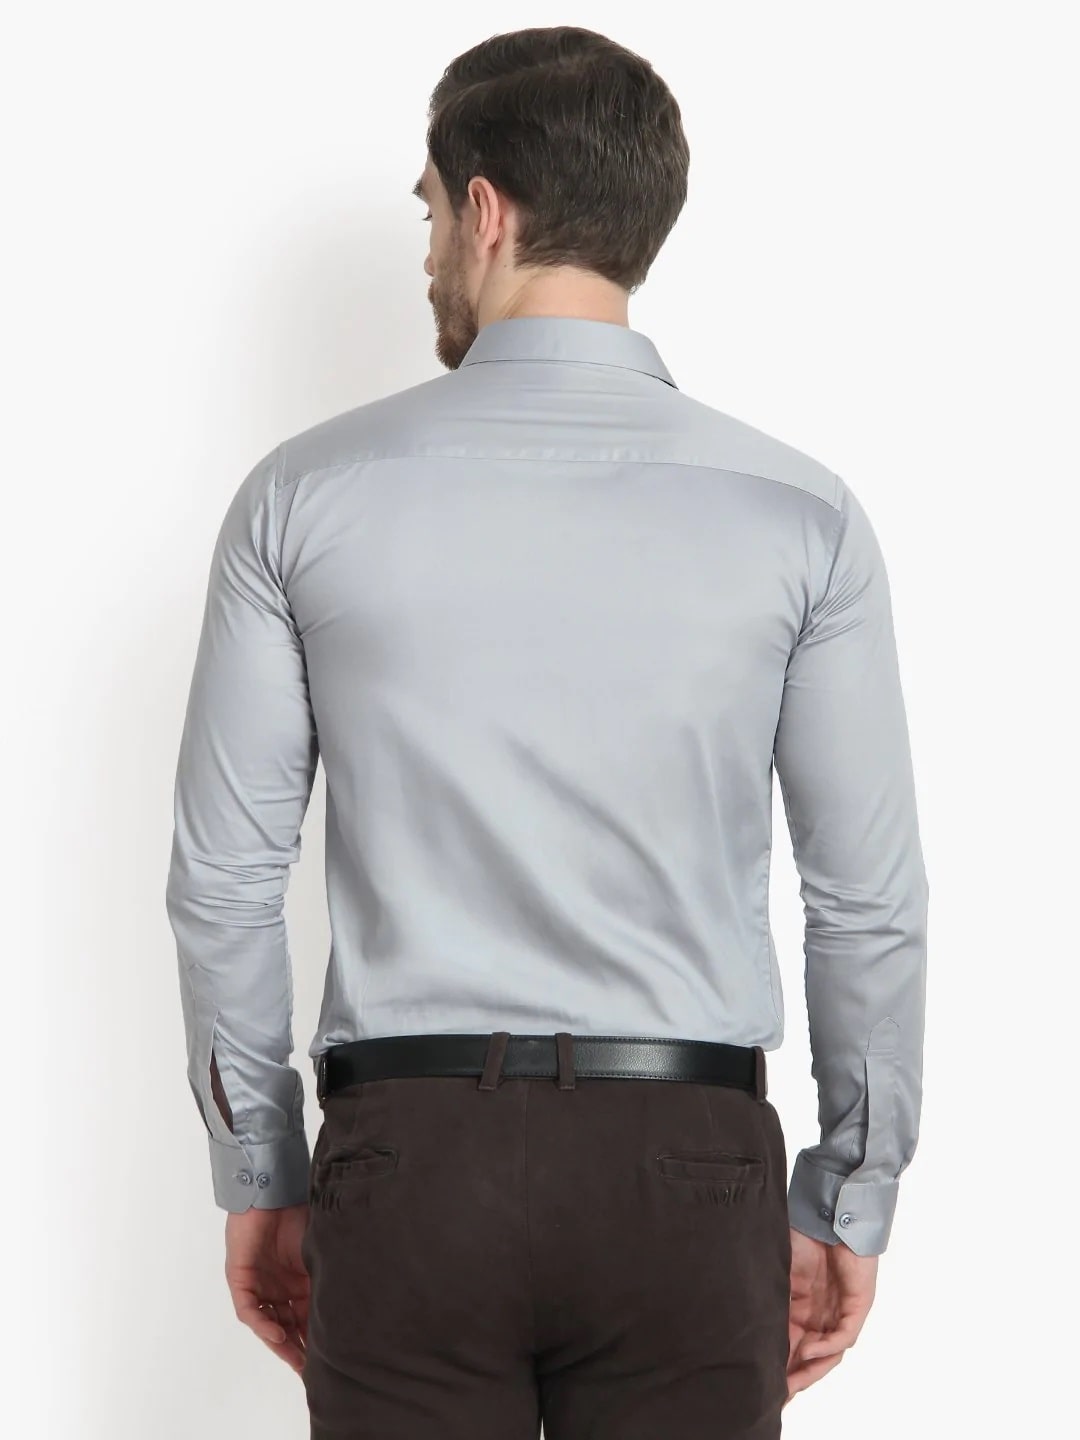 Men's Formal Grey Tailored- Fit Solid Cotton Shirt Code 1033